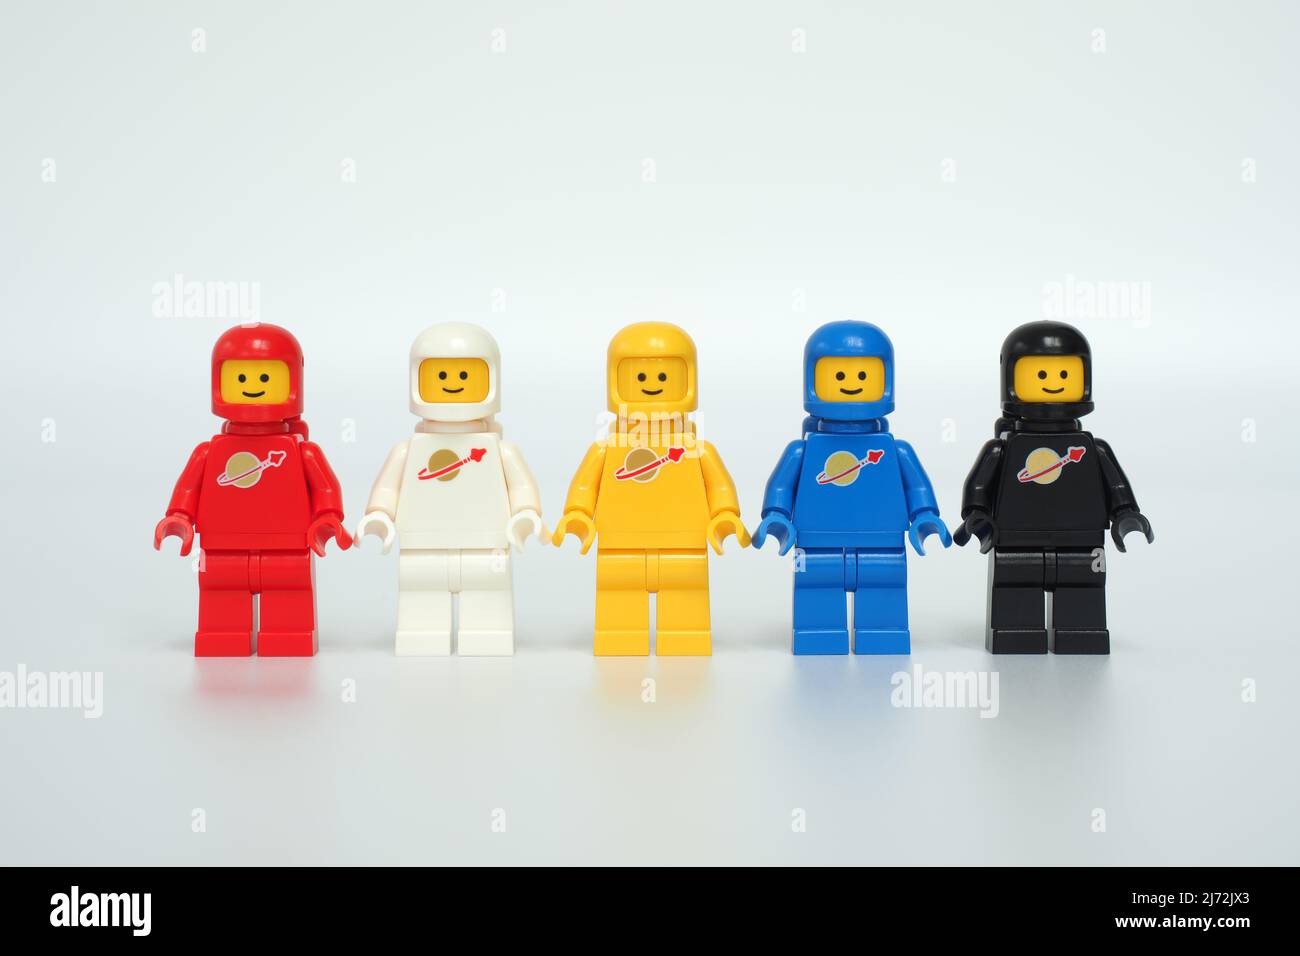 44MP size HRS. Lego Classic Space mini figures with old style helmets. Red  & white first introduced in 1978, yellow in 1979, & blue & black in 1984  Stock Photo - Alamy